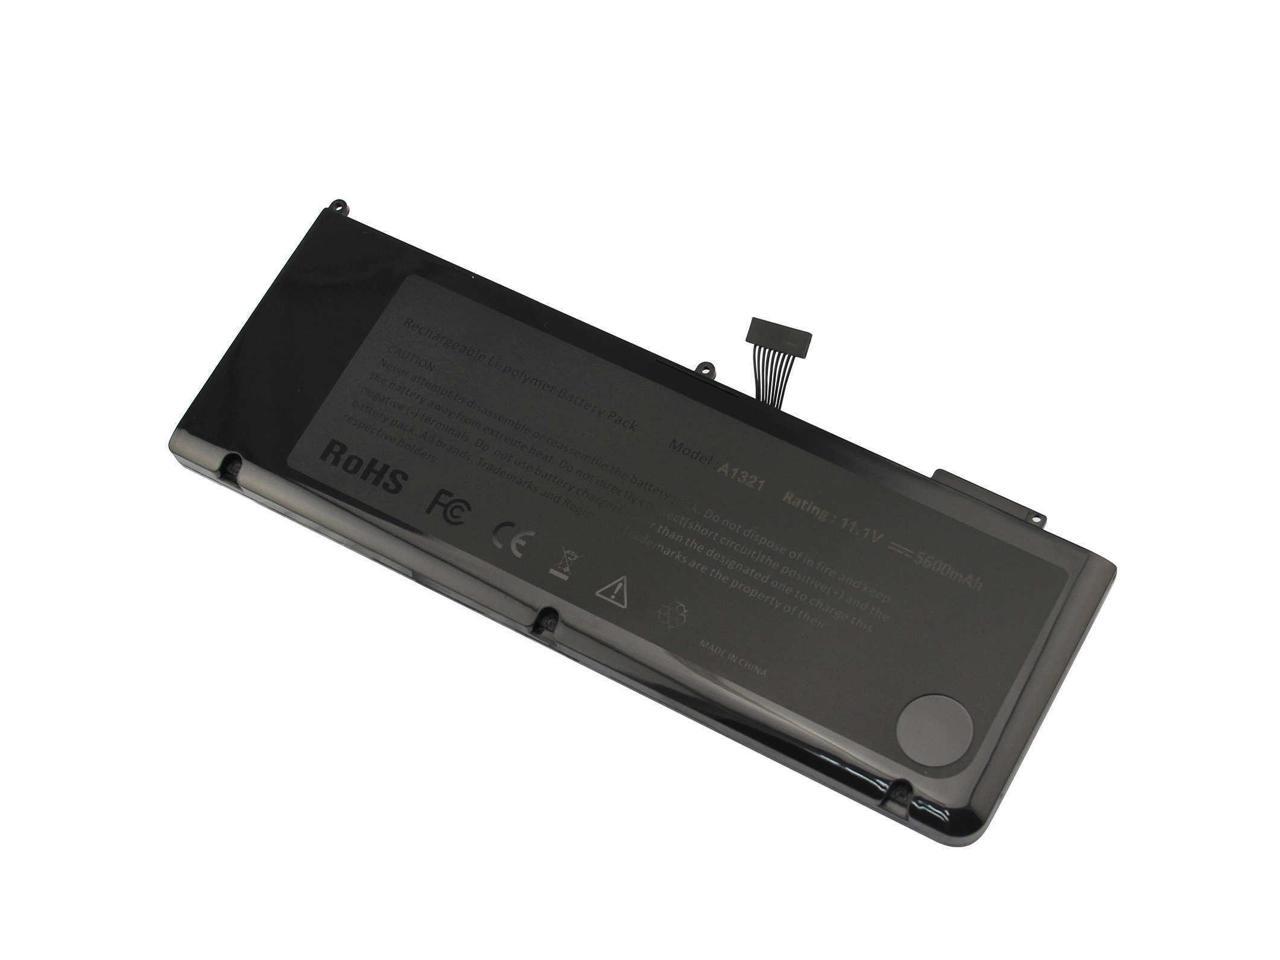 mid 2010 macbook pro battery replacement